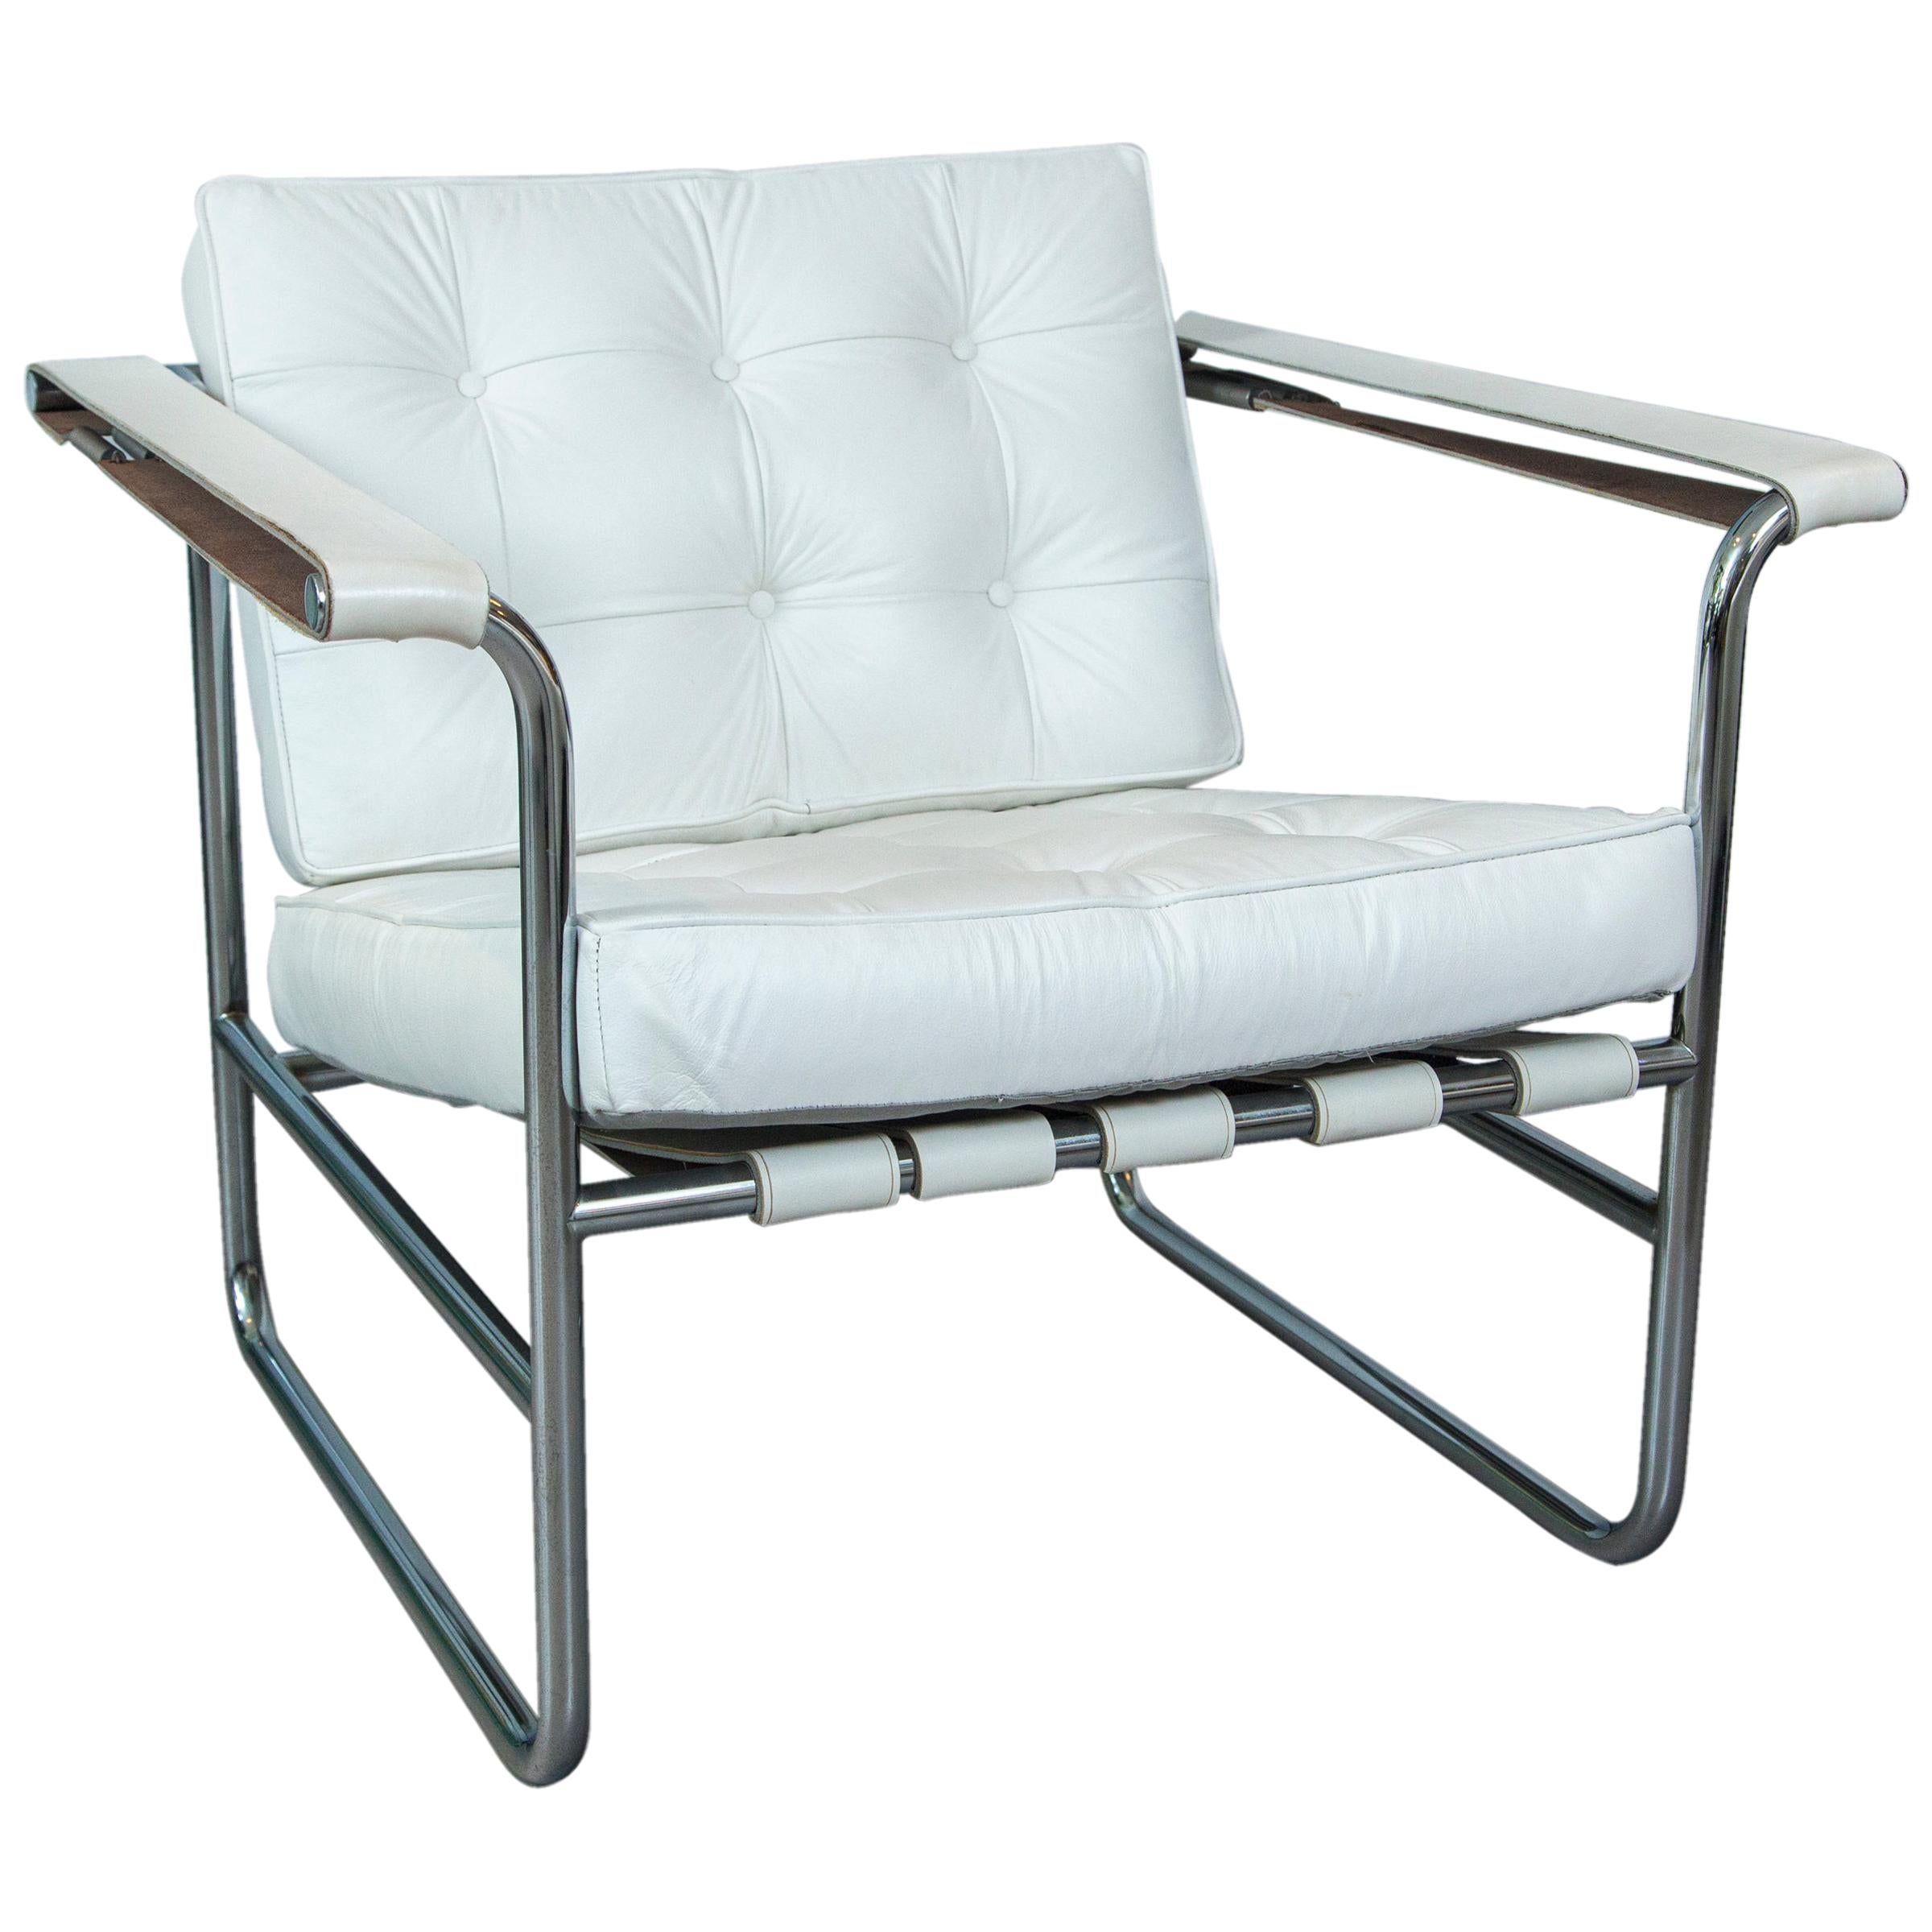 A pair of chrome tubular metal and tufted white leather lounge chairs produced by Stendig, Switzerland.